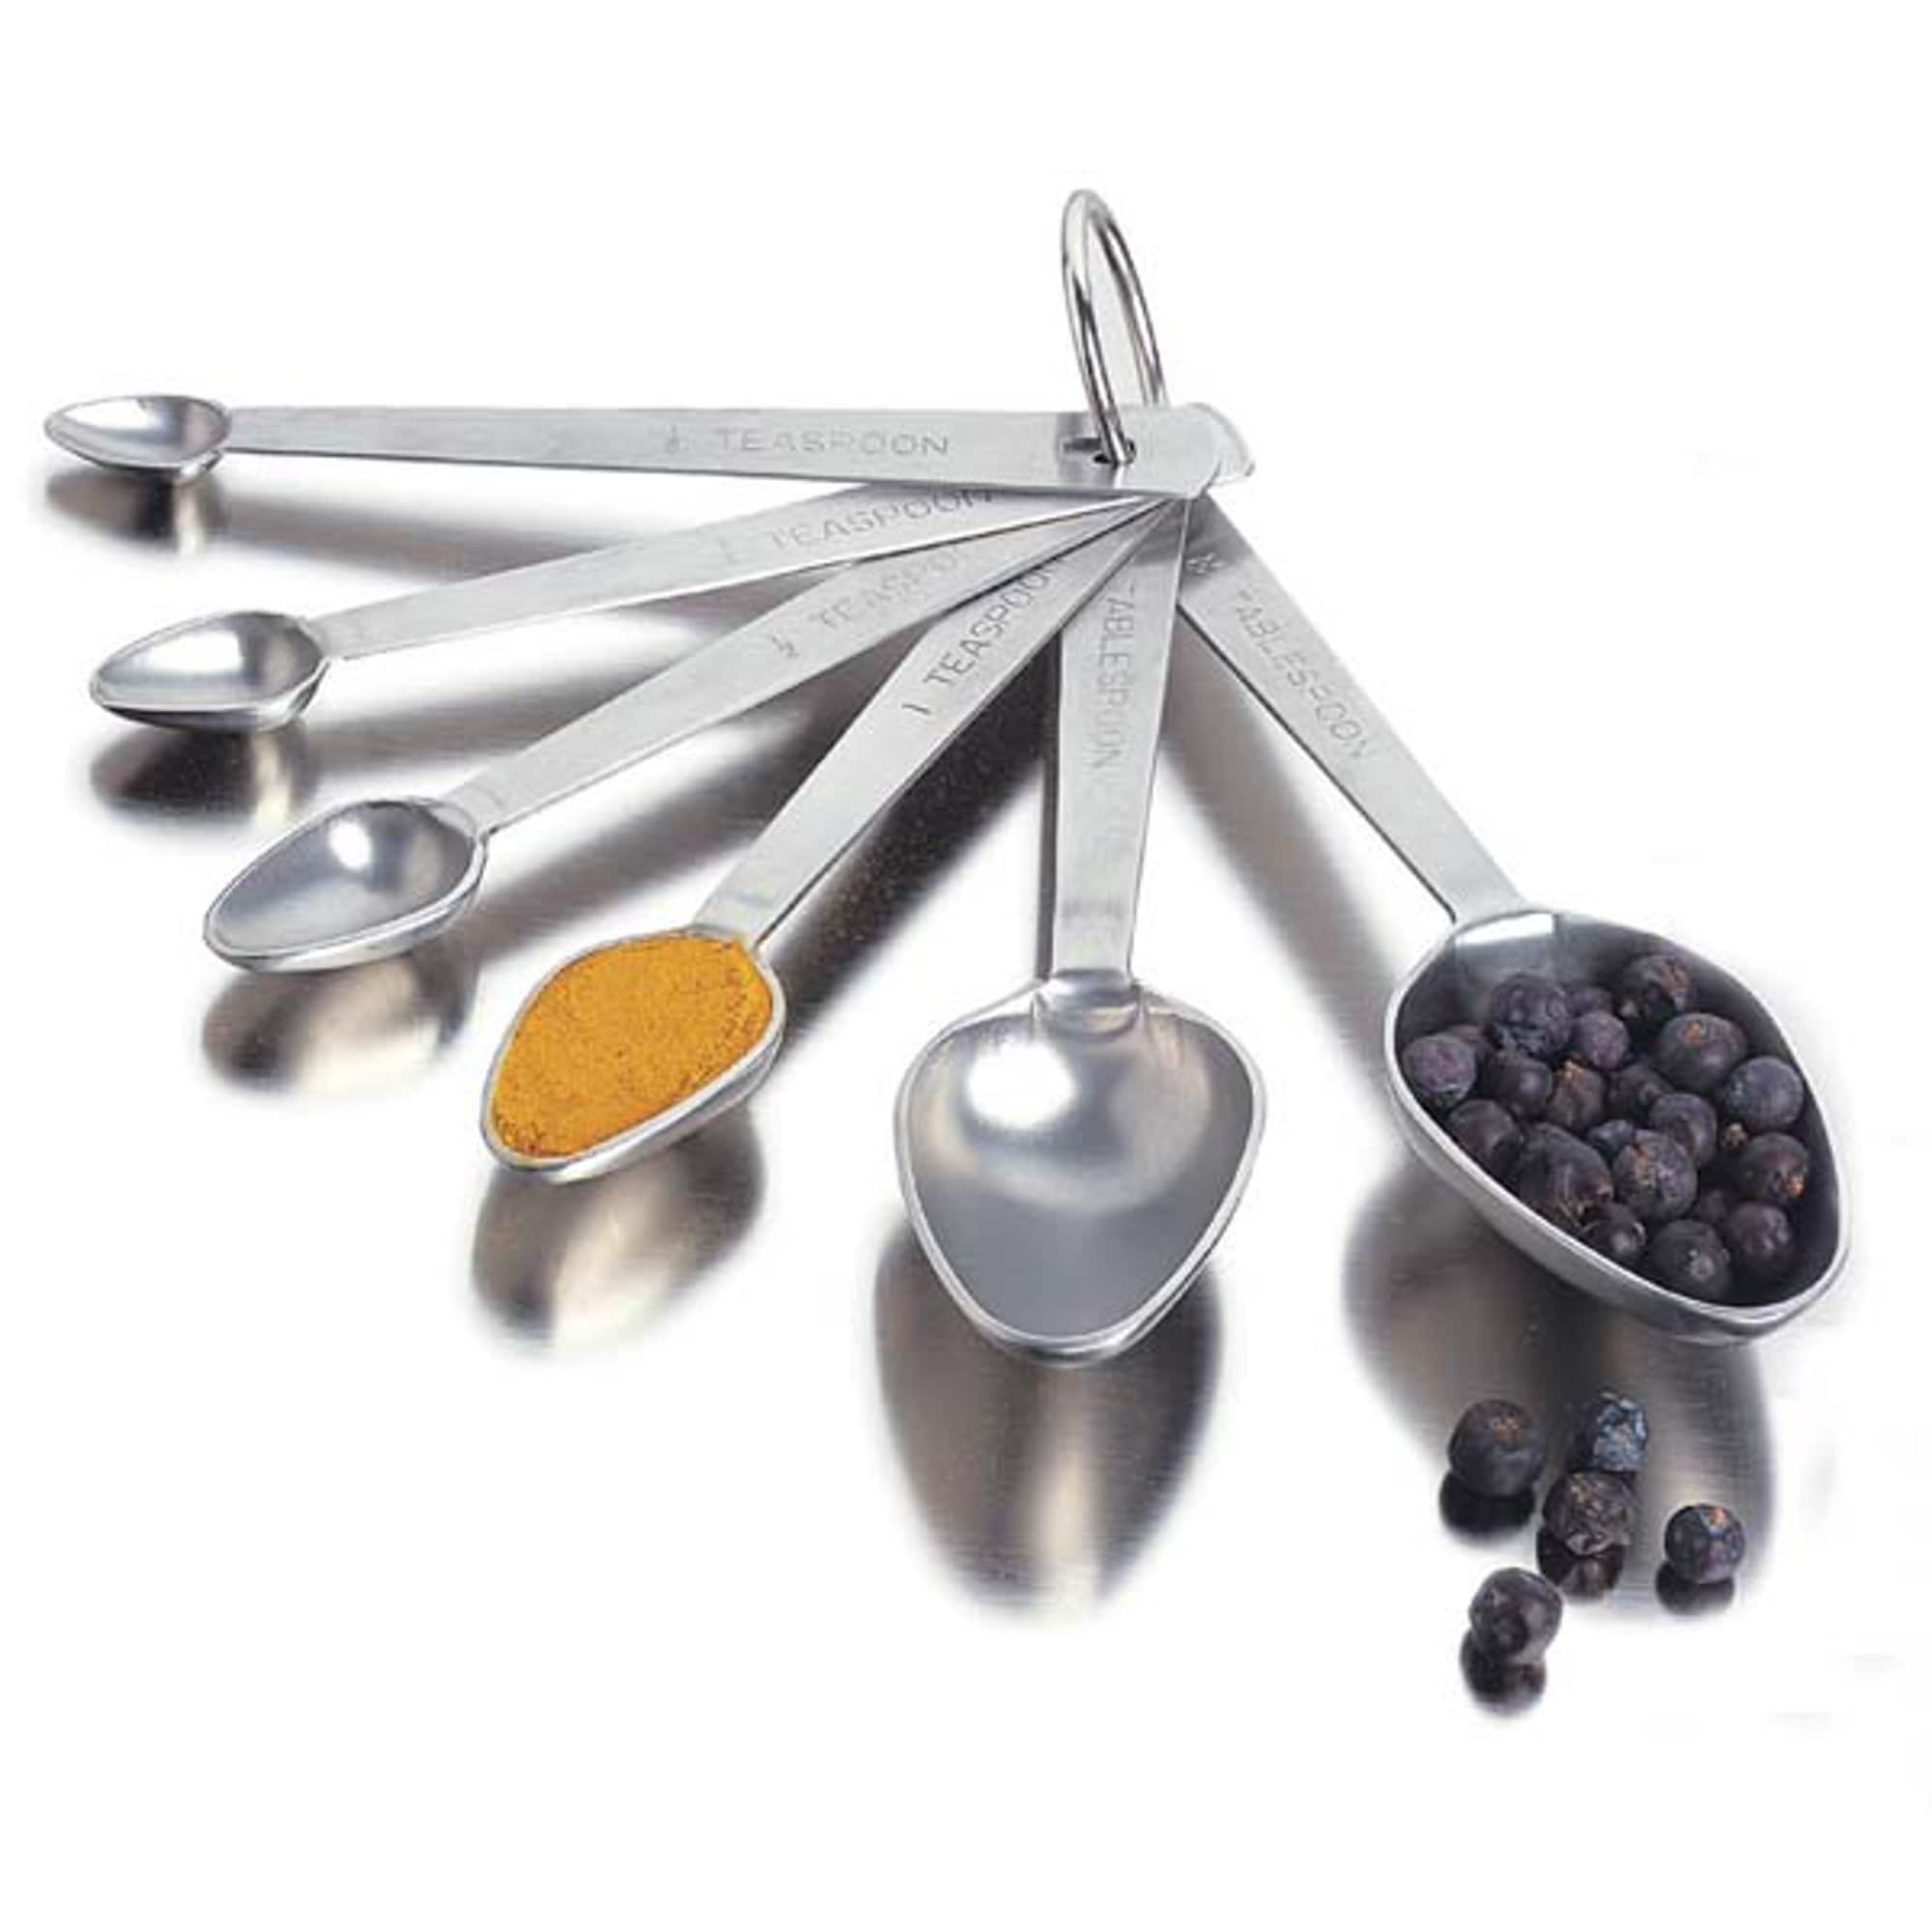 https://ak1.ostkcdn.com/images/products/is/images/direct/f236ba36f37730b41088442ccc1b21d57b189995/Amco-Professional-Performance-Measuring-Spoons%2C-Set-of-6.jpg